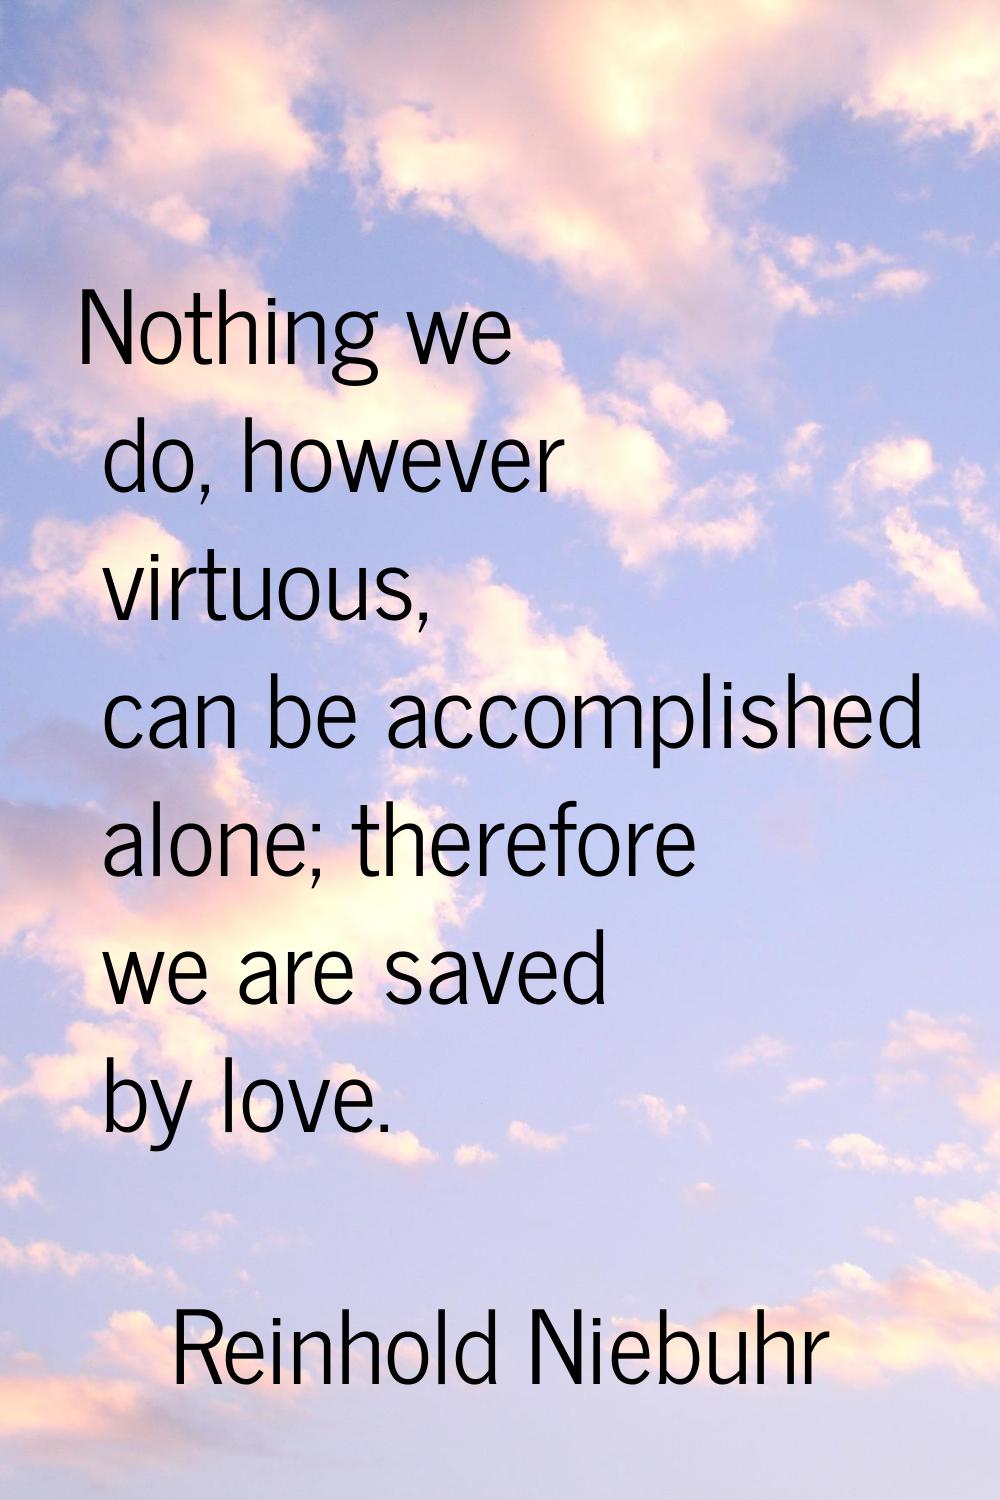 Nothing we do, however virtuous, can be accomplished alone; therefore we are saved by love.